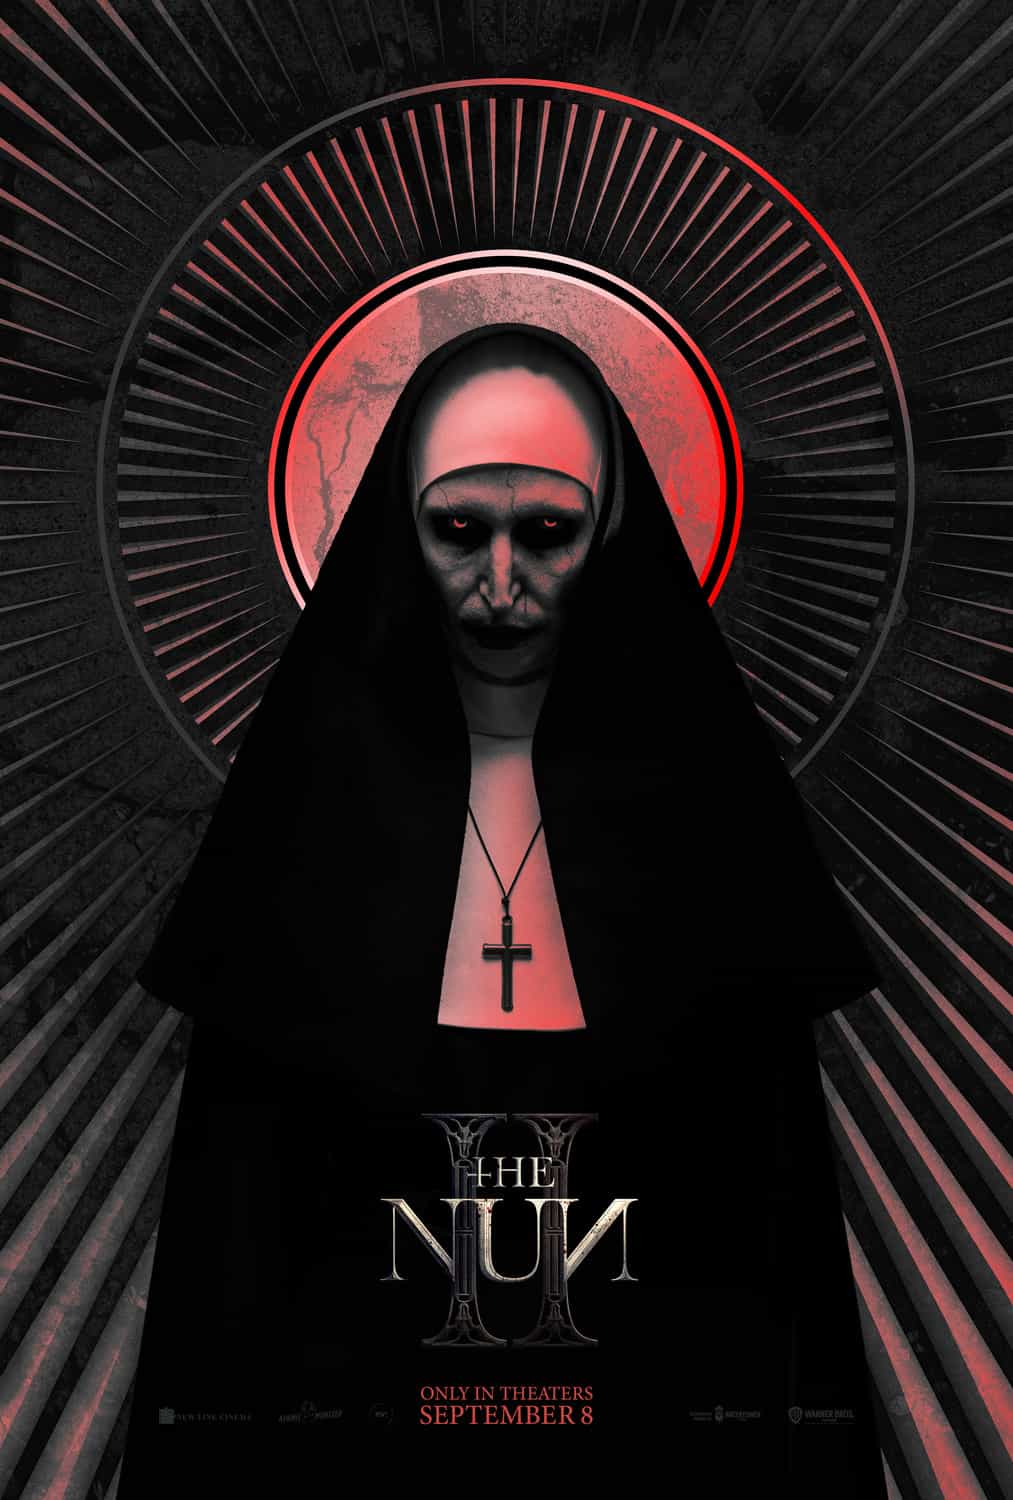 The Nun II is given a 15 age rating in the UK for strong horror, violence, bloody images